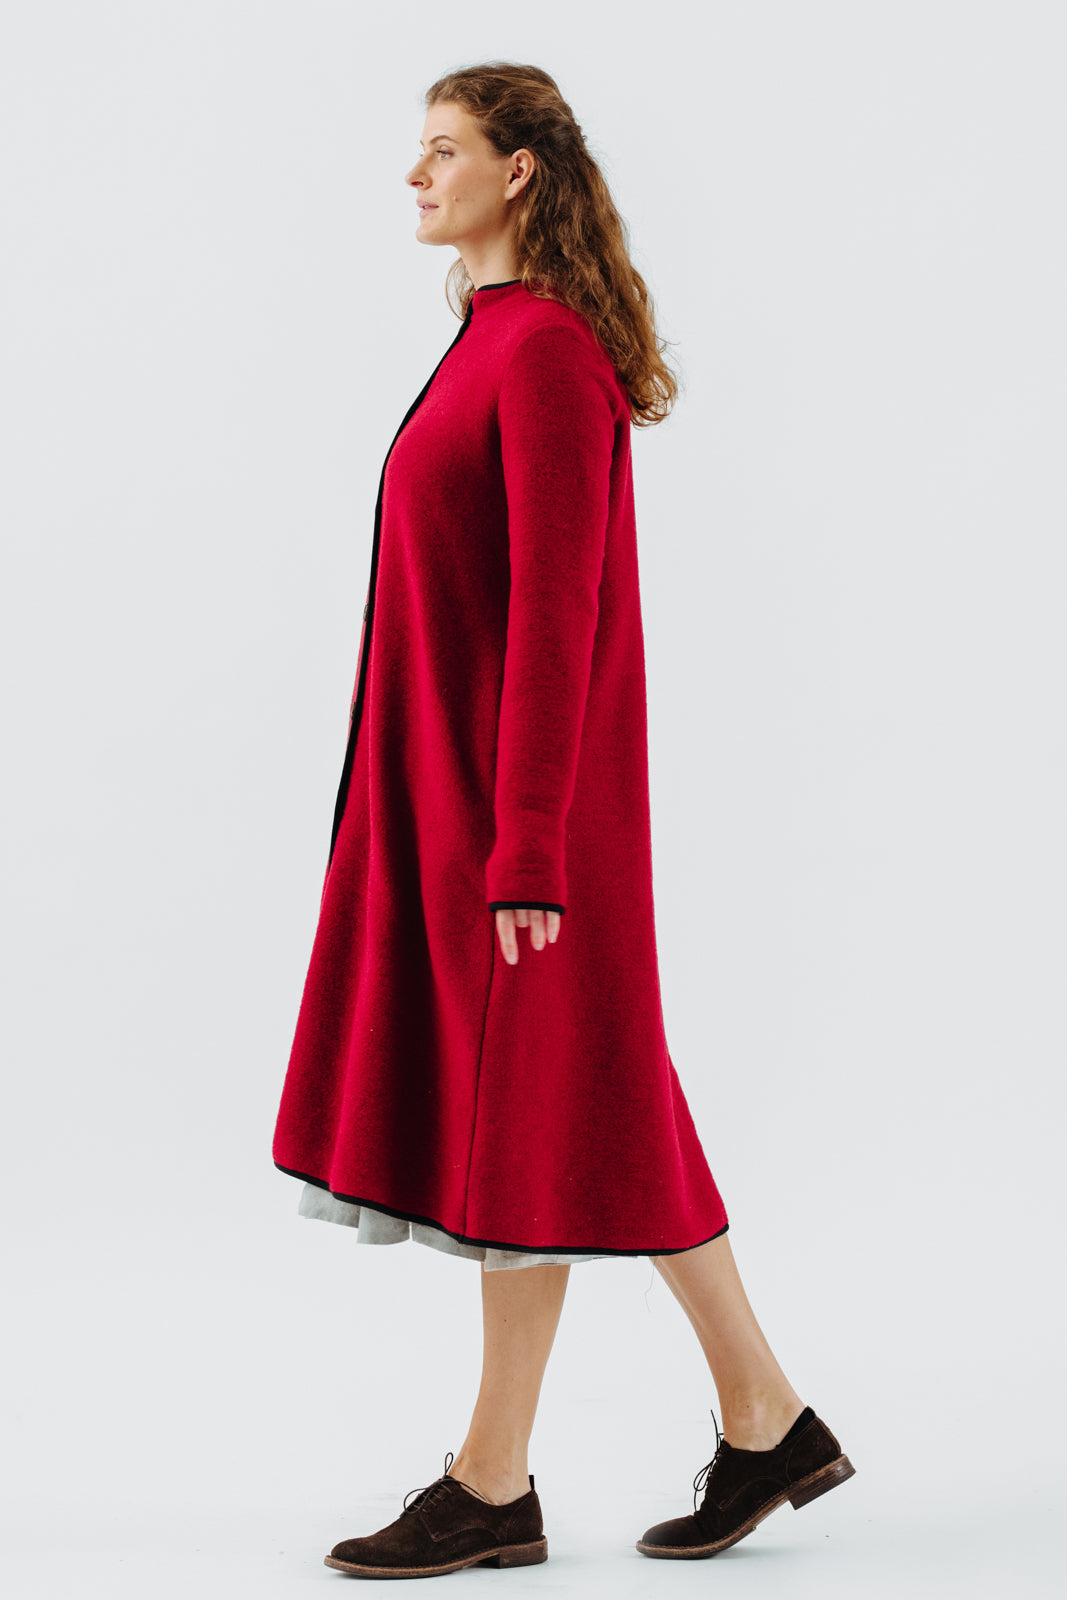 Classic Coat, Wool#color_red-poppy